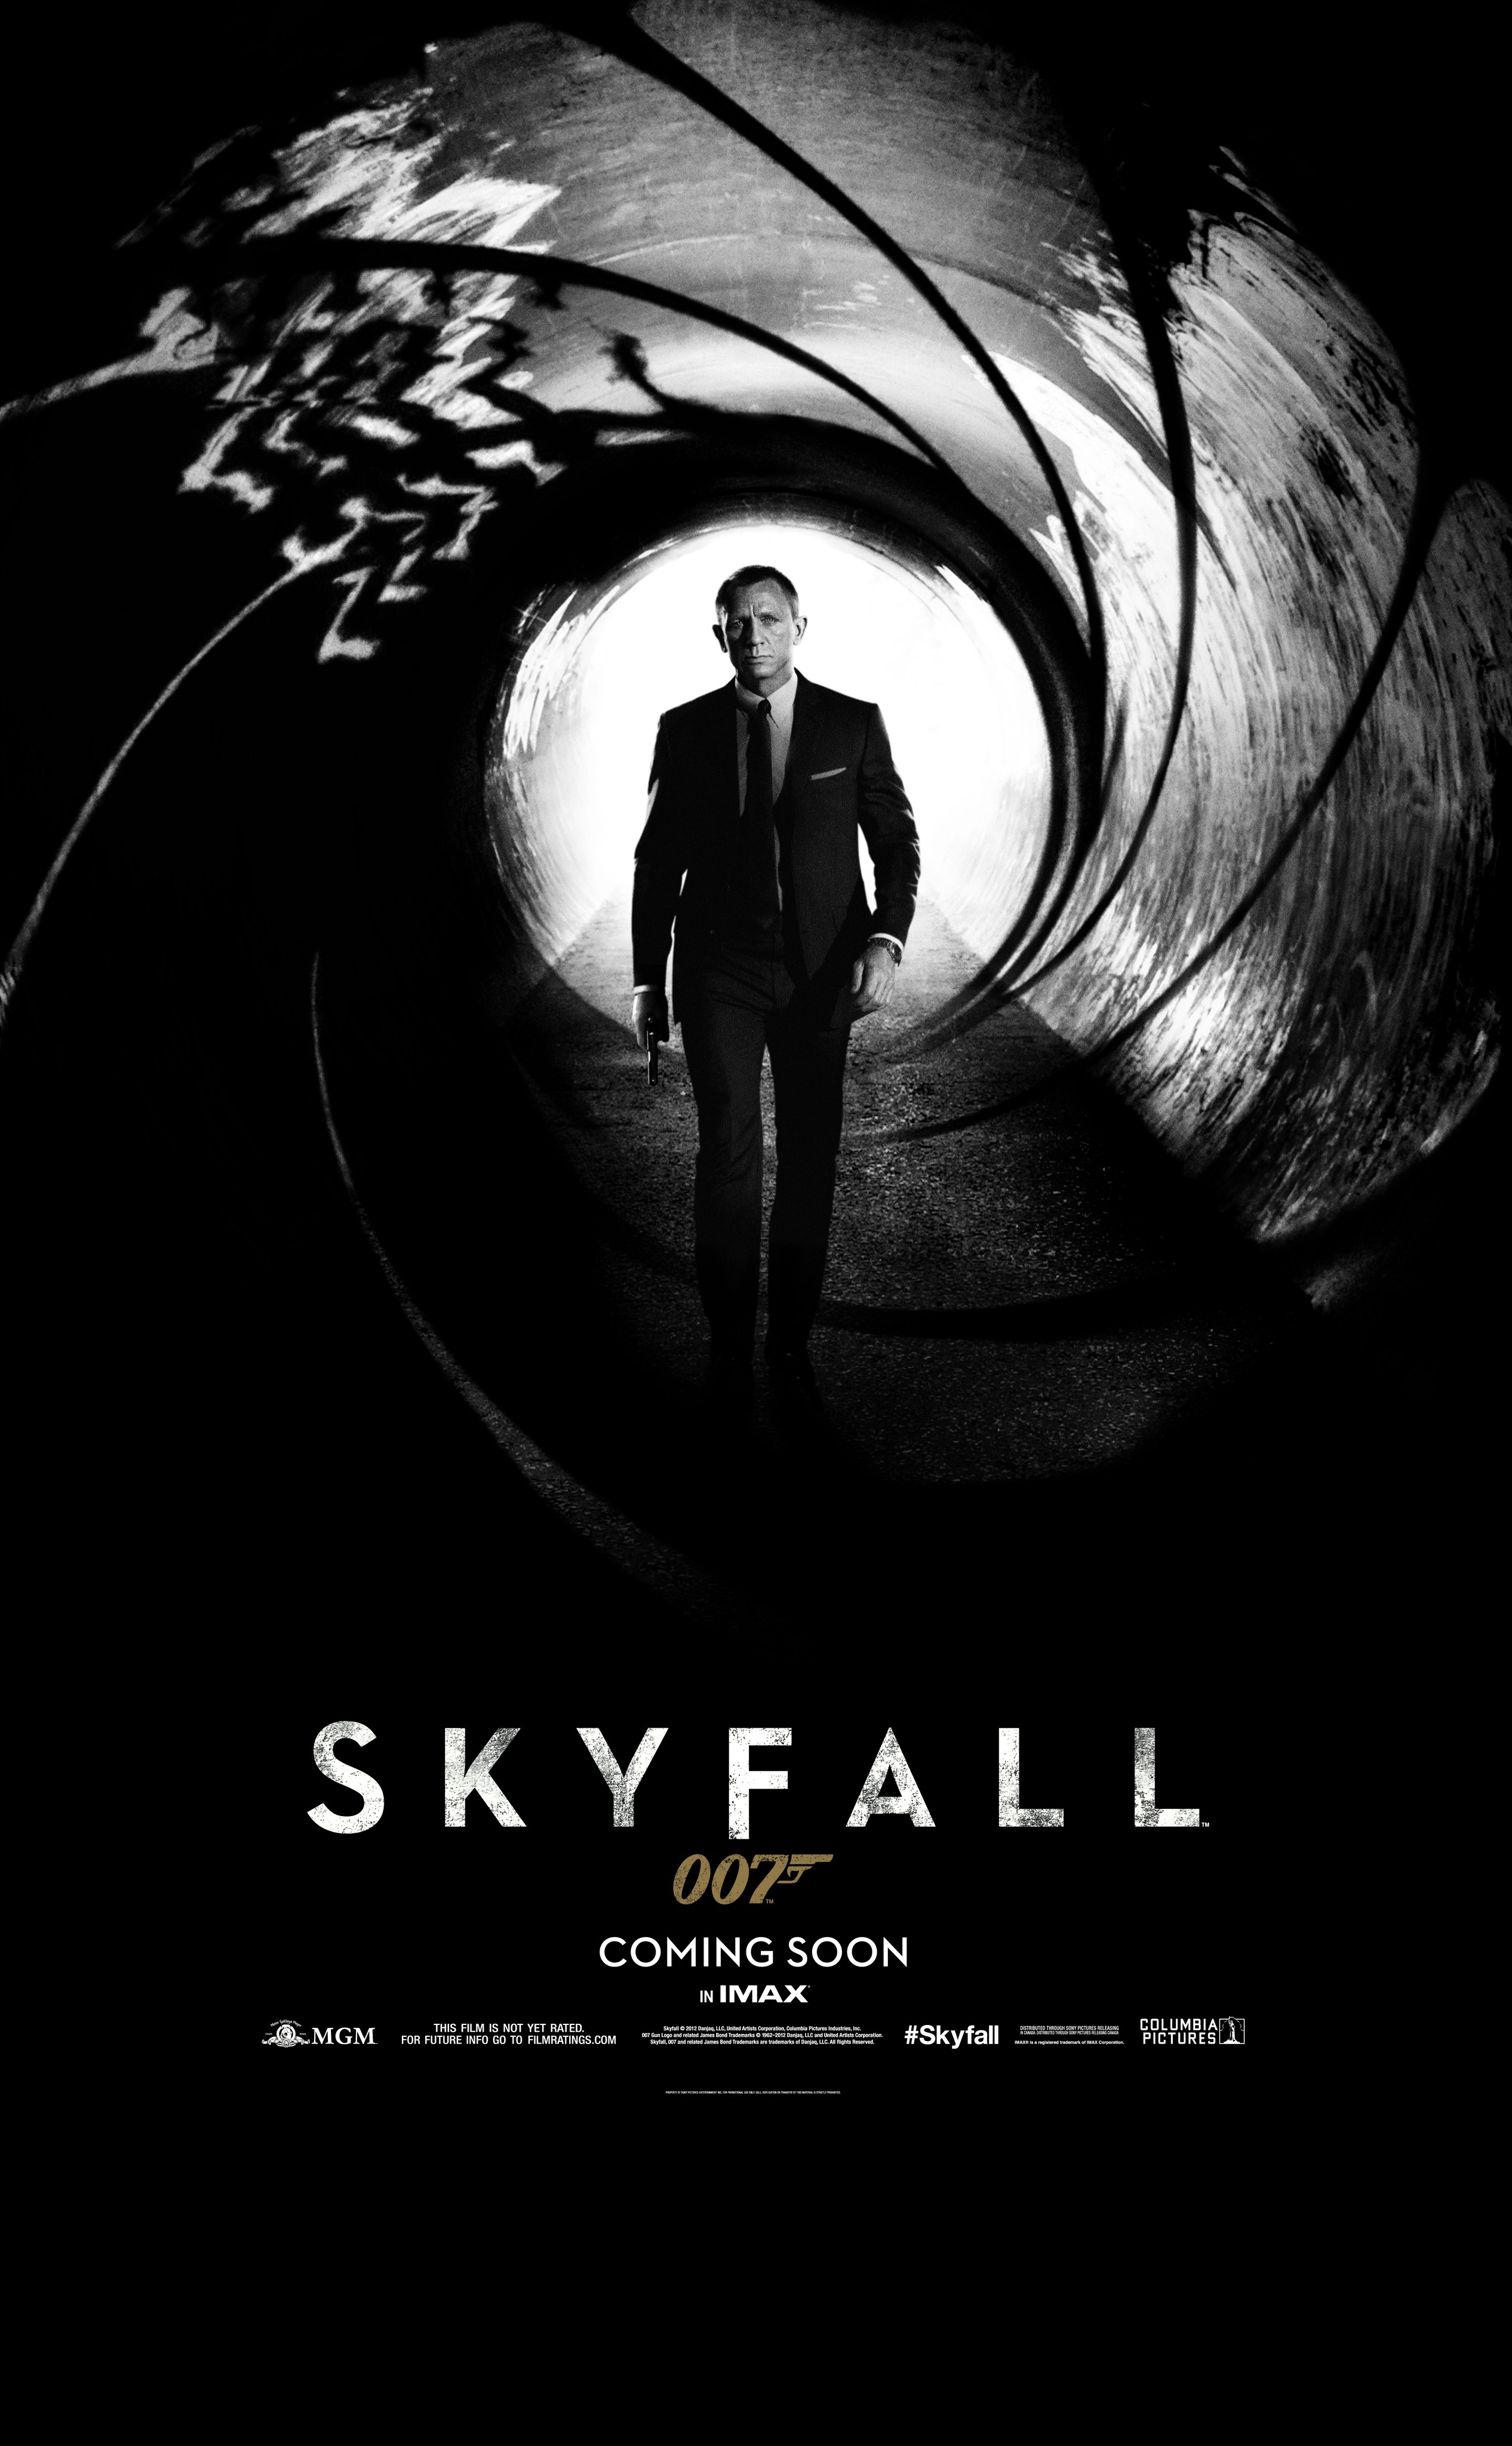 Skyfall: Trailer 1 - Trailers & Videos - Rotten Tomatoes